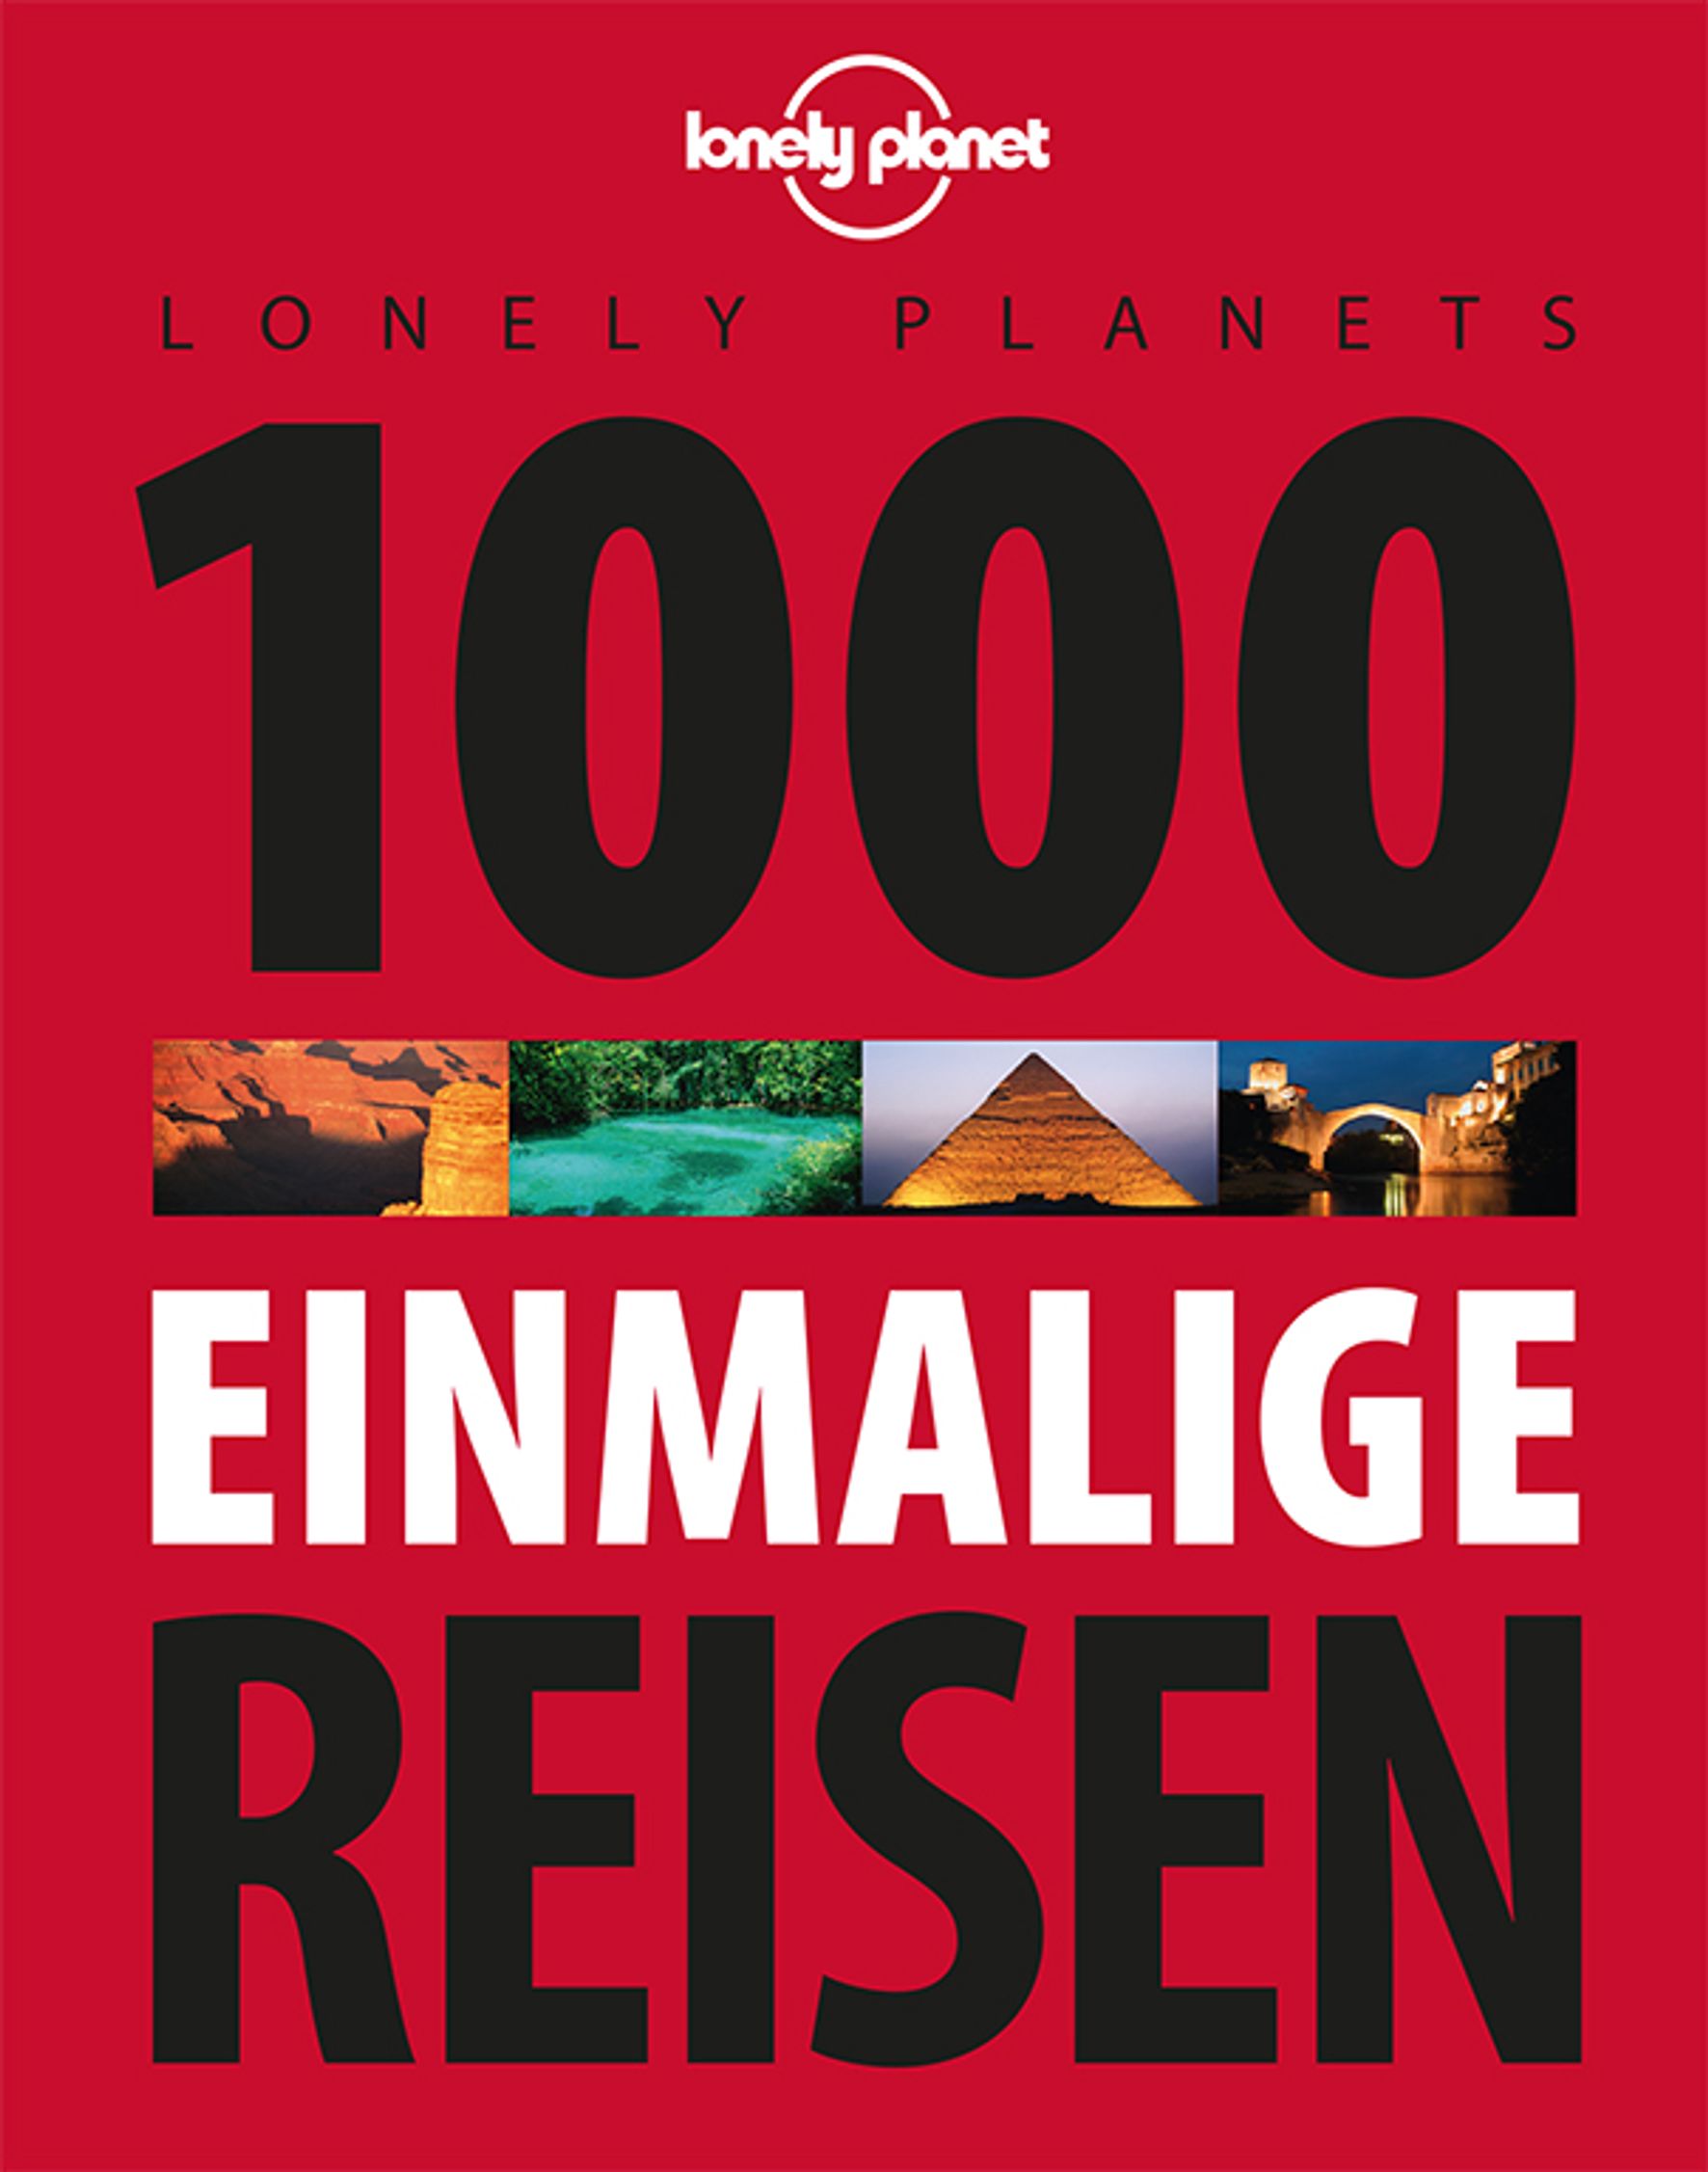 Lonely Planet Lonely Planets 1000 einmalige Reisen